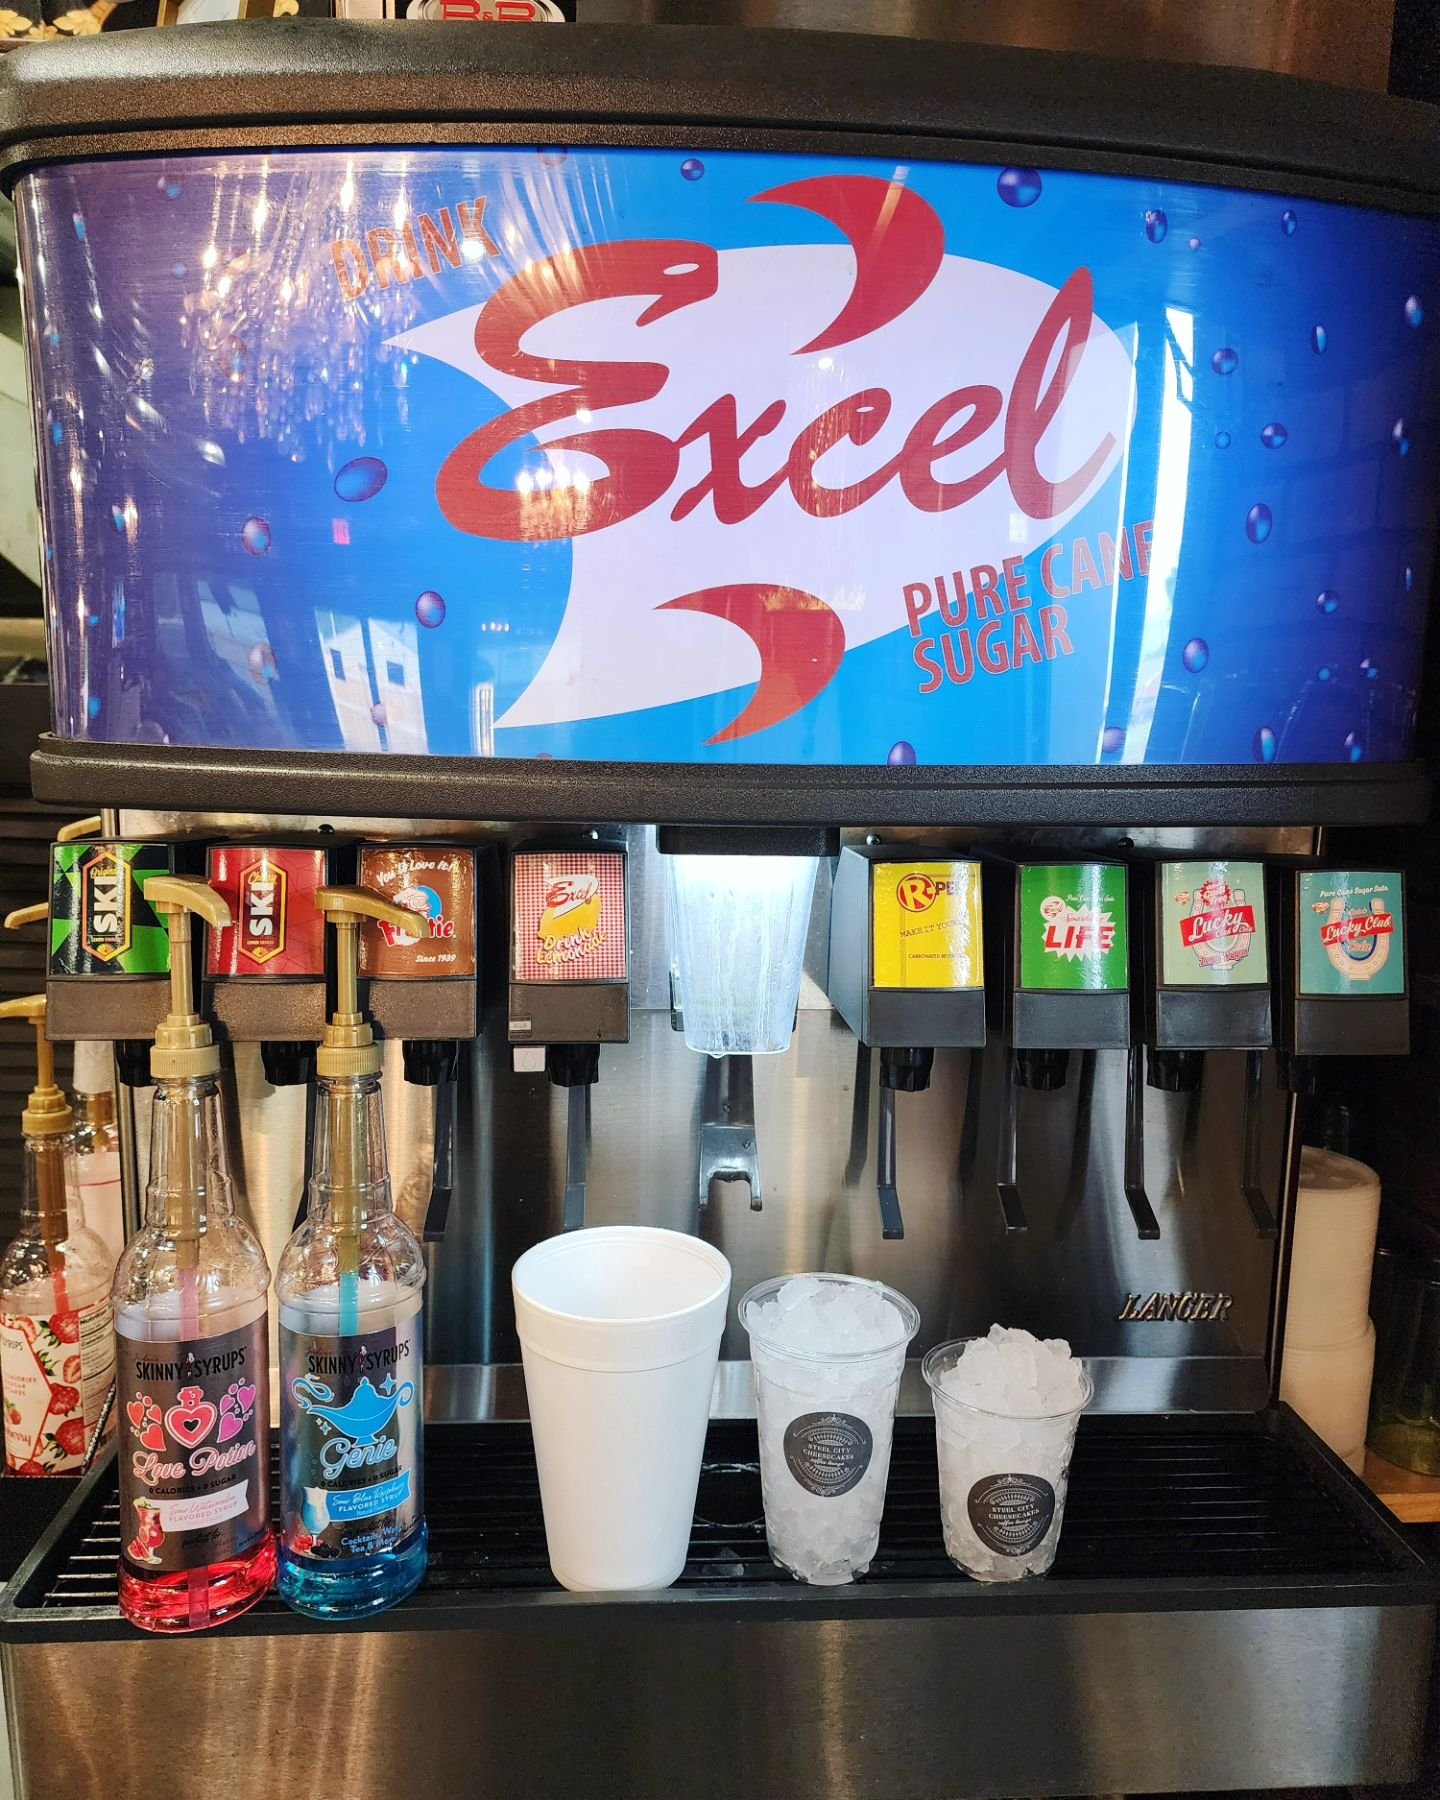 DID YOU KNOW

we carry SKI [Excel] fountain sodies?!
&amp; nugget ice?!?!?! 
&amp;&amp; a wide variety of fun (sf) syrups?!

pop in through the drive-thru and get a fountain drink!!
@excelbottling 

open until 6 tonight!
618-491-0901 
4025 Pontoon Ro